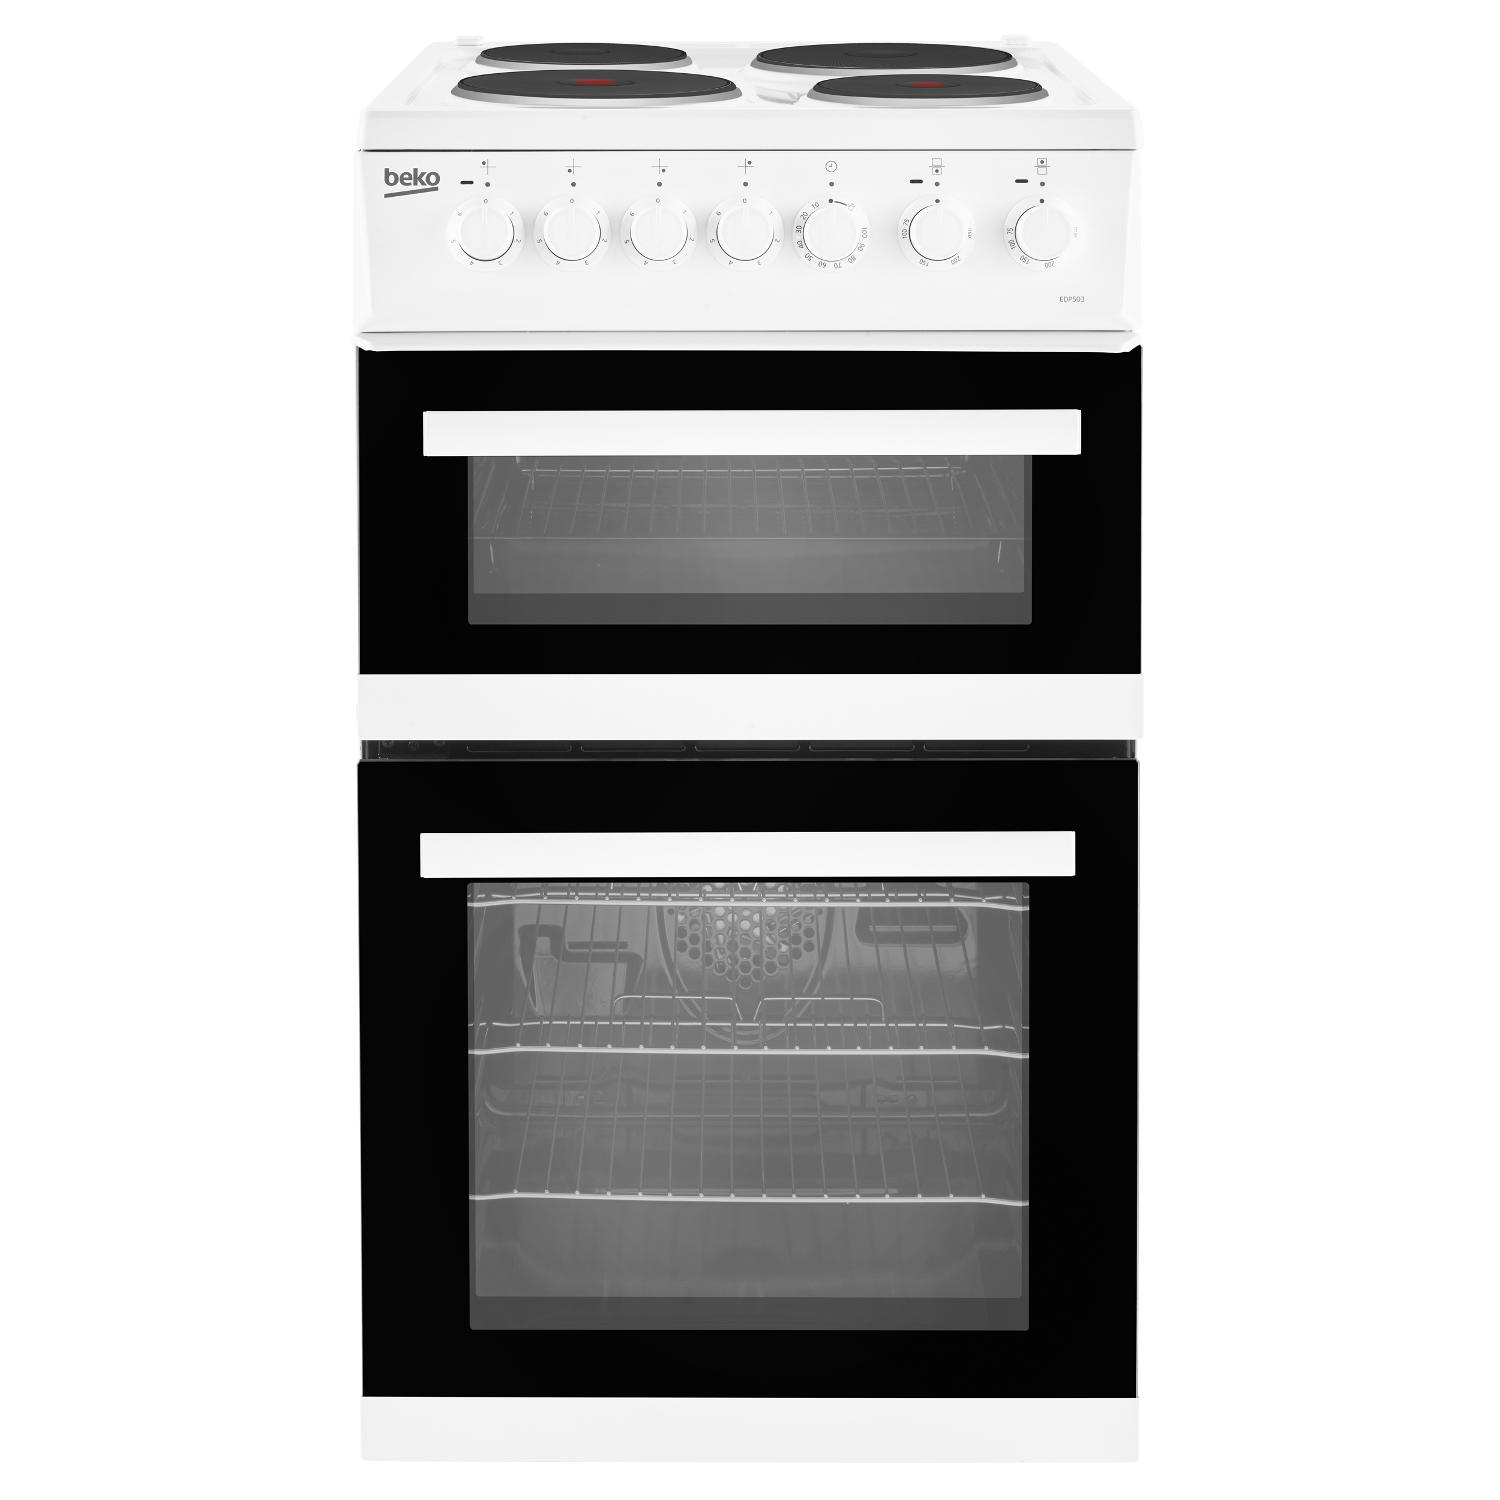 Beko EDP503W 50cm Electric Double Oven with Grill Cooker - White - 0